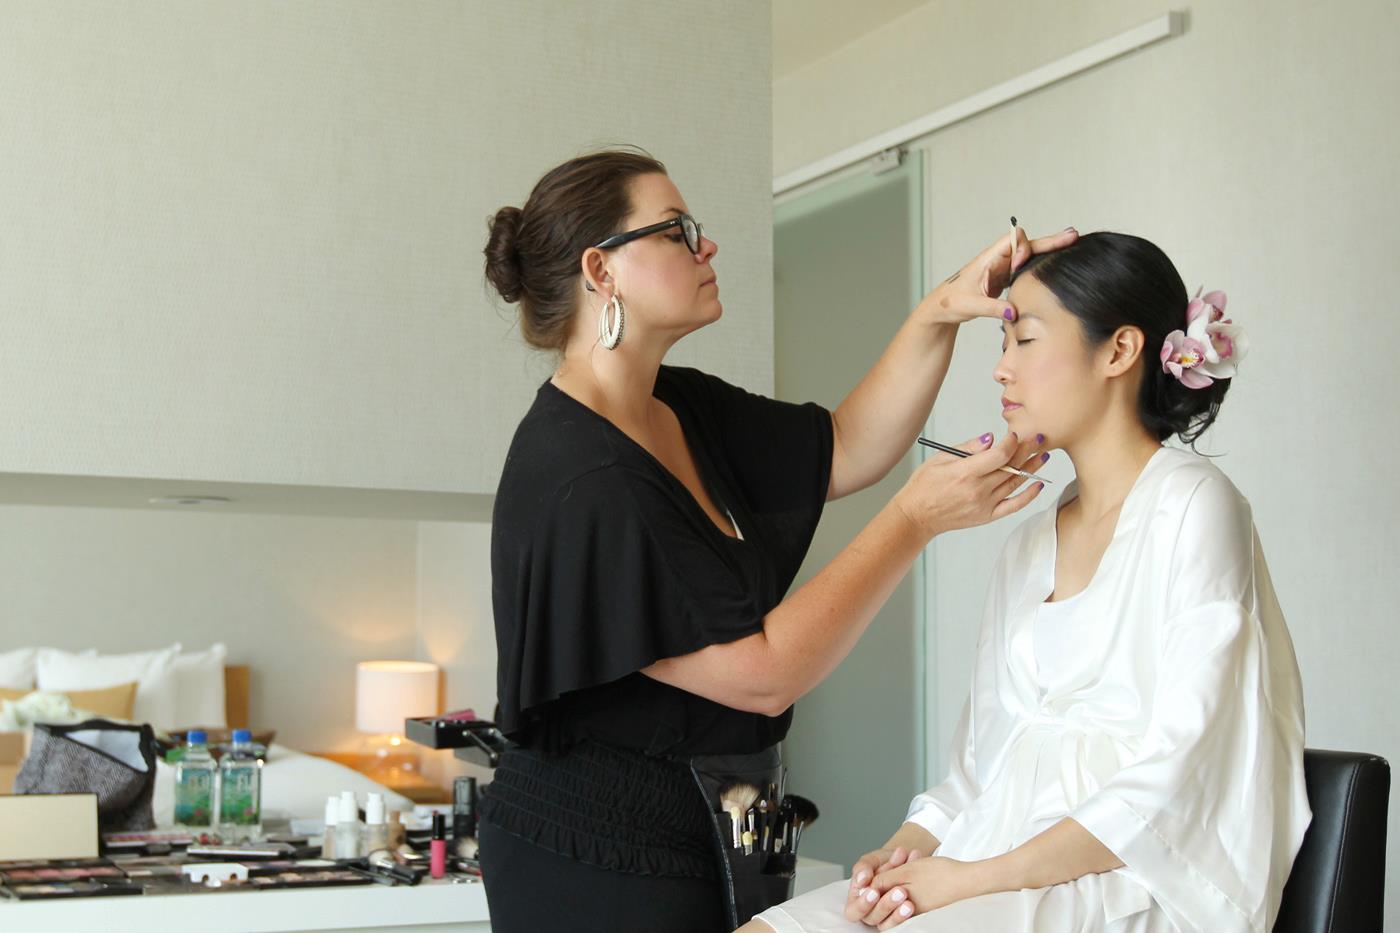 Sonia Roselli applying makeup to a bride-to-be.